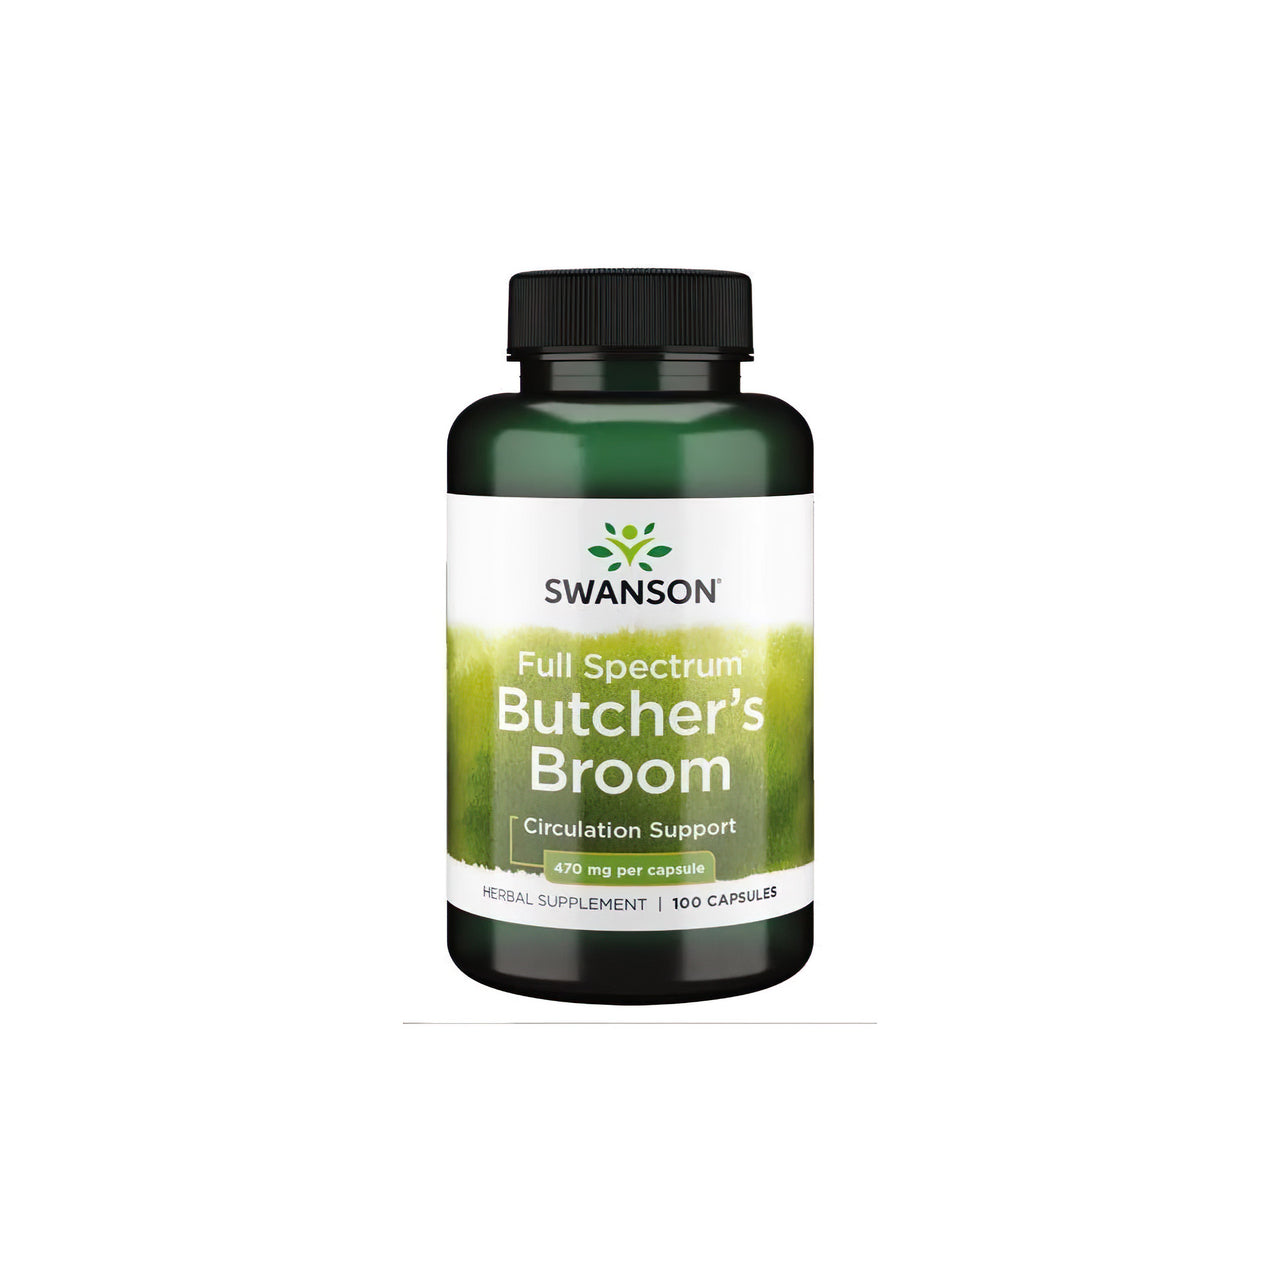 A dietary supplement bottle of Swanson's Butcher's Broom with 470 mg in 100 Caps.